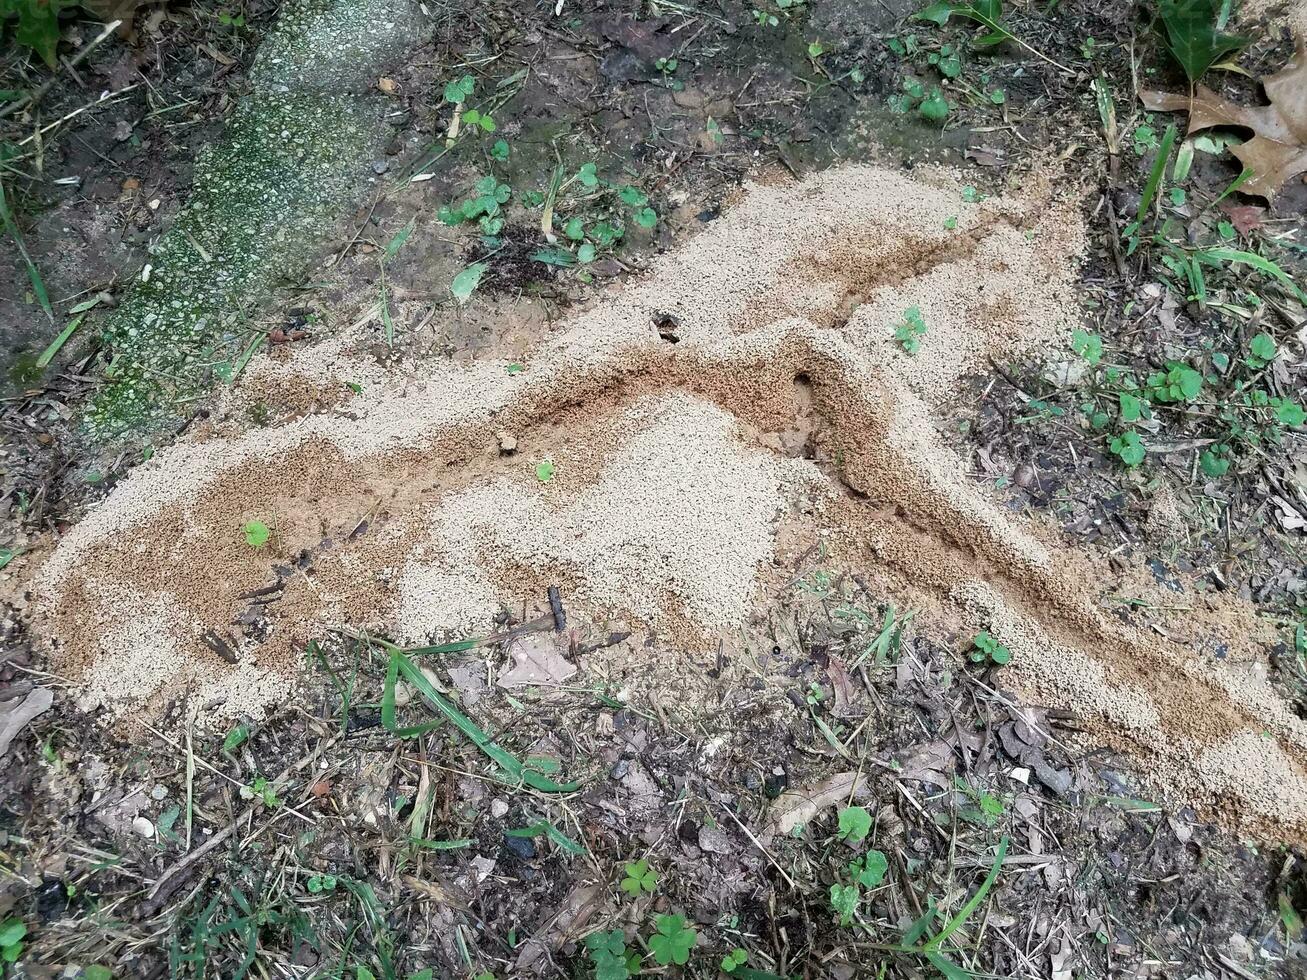 dirt ant hill or mound or nest outdoor photo